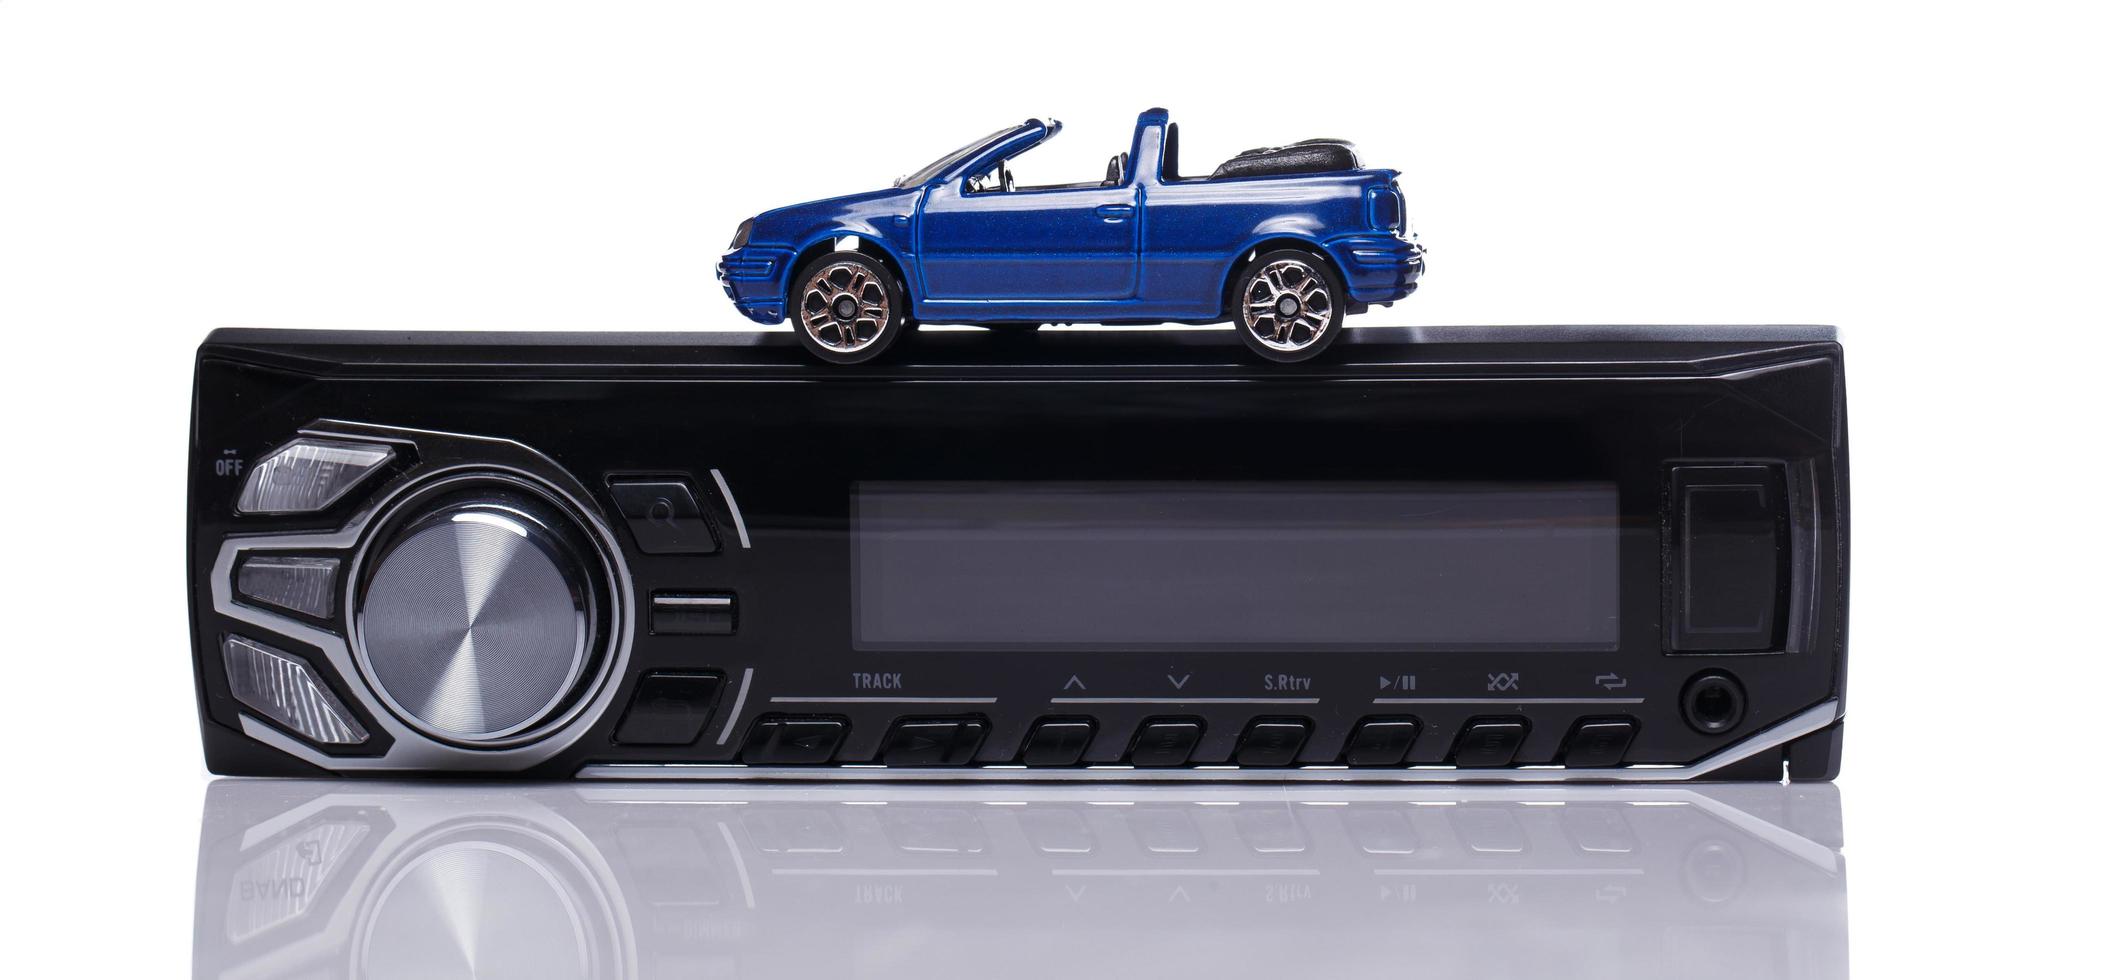 Car audio system and toy vehicle photo